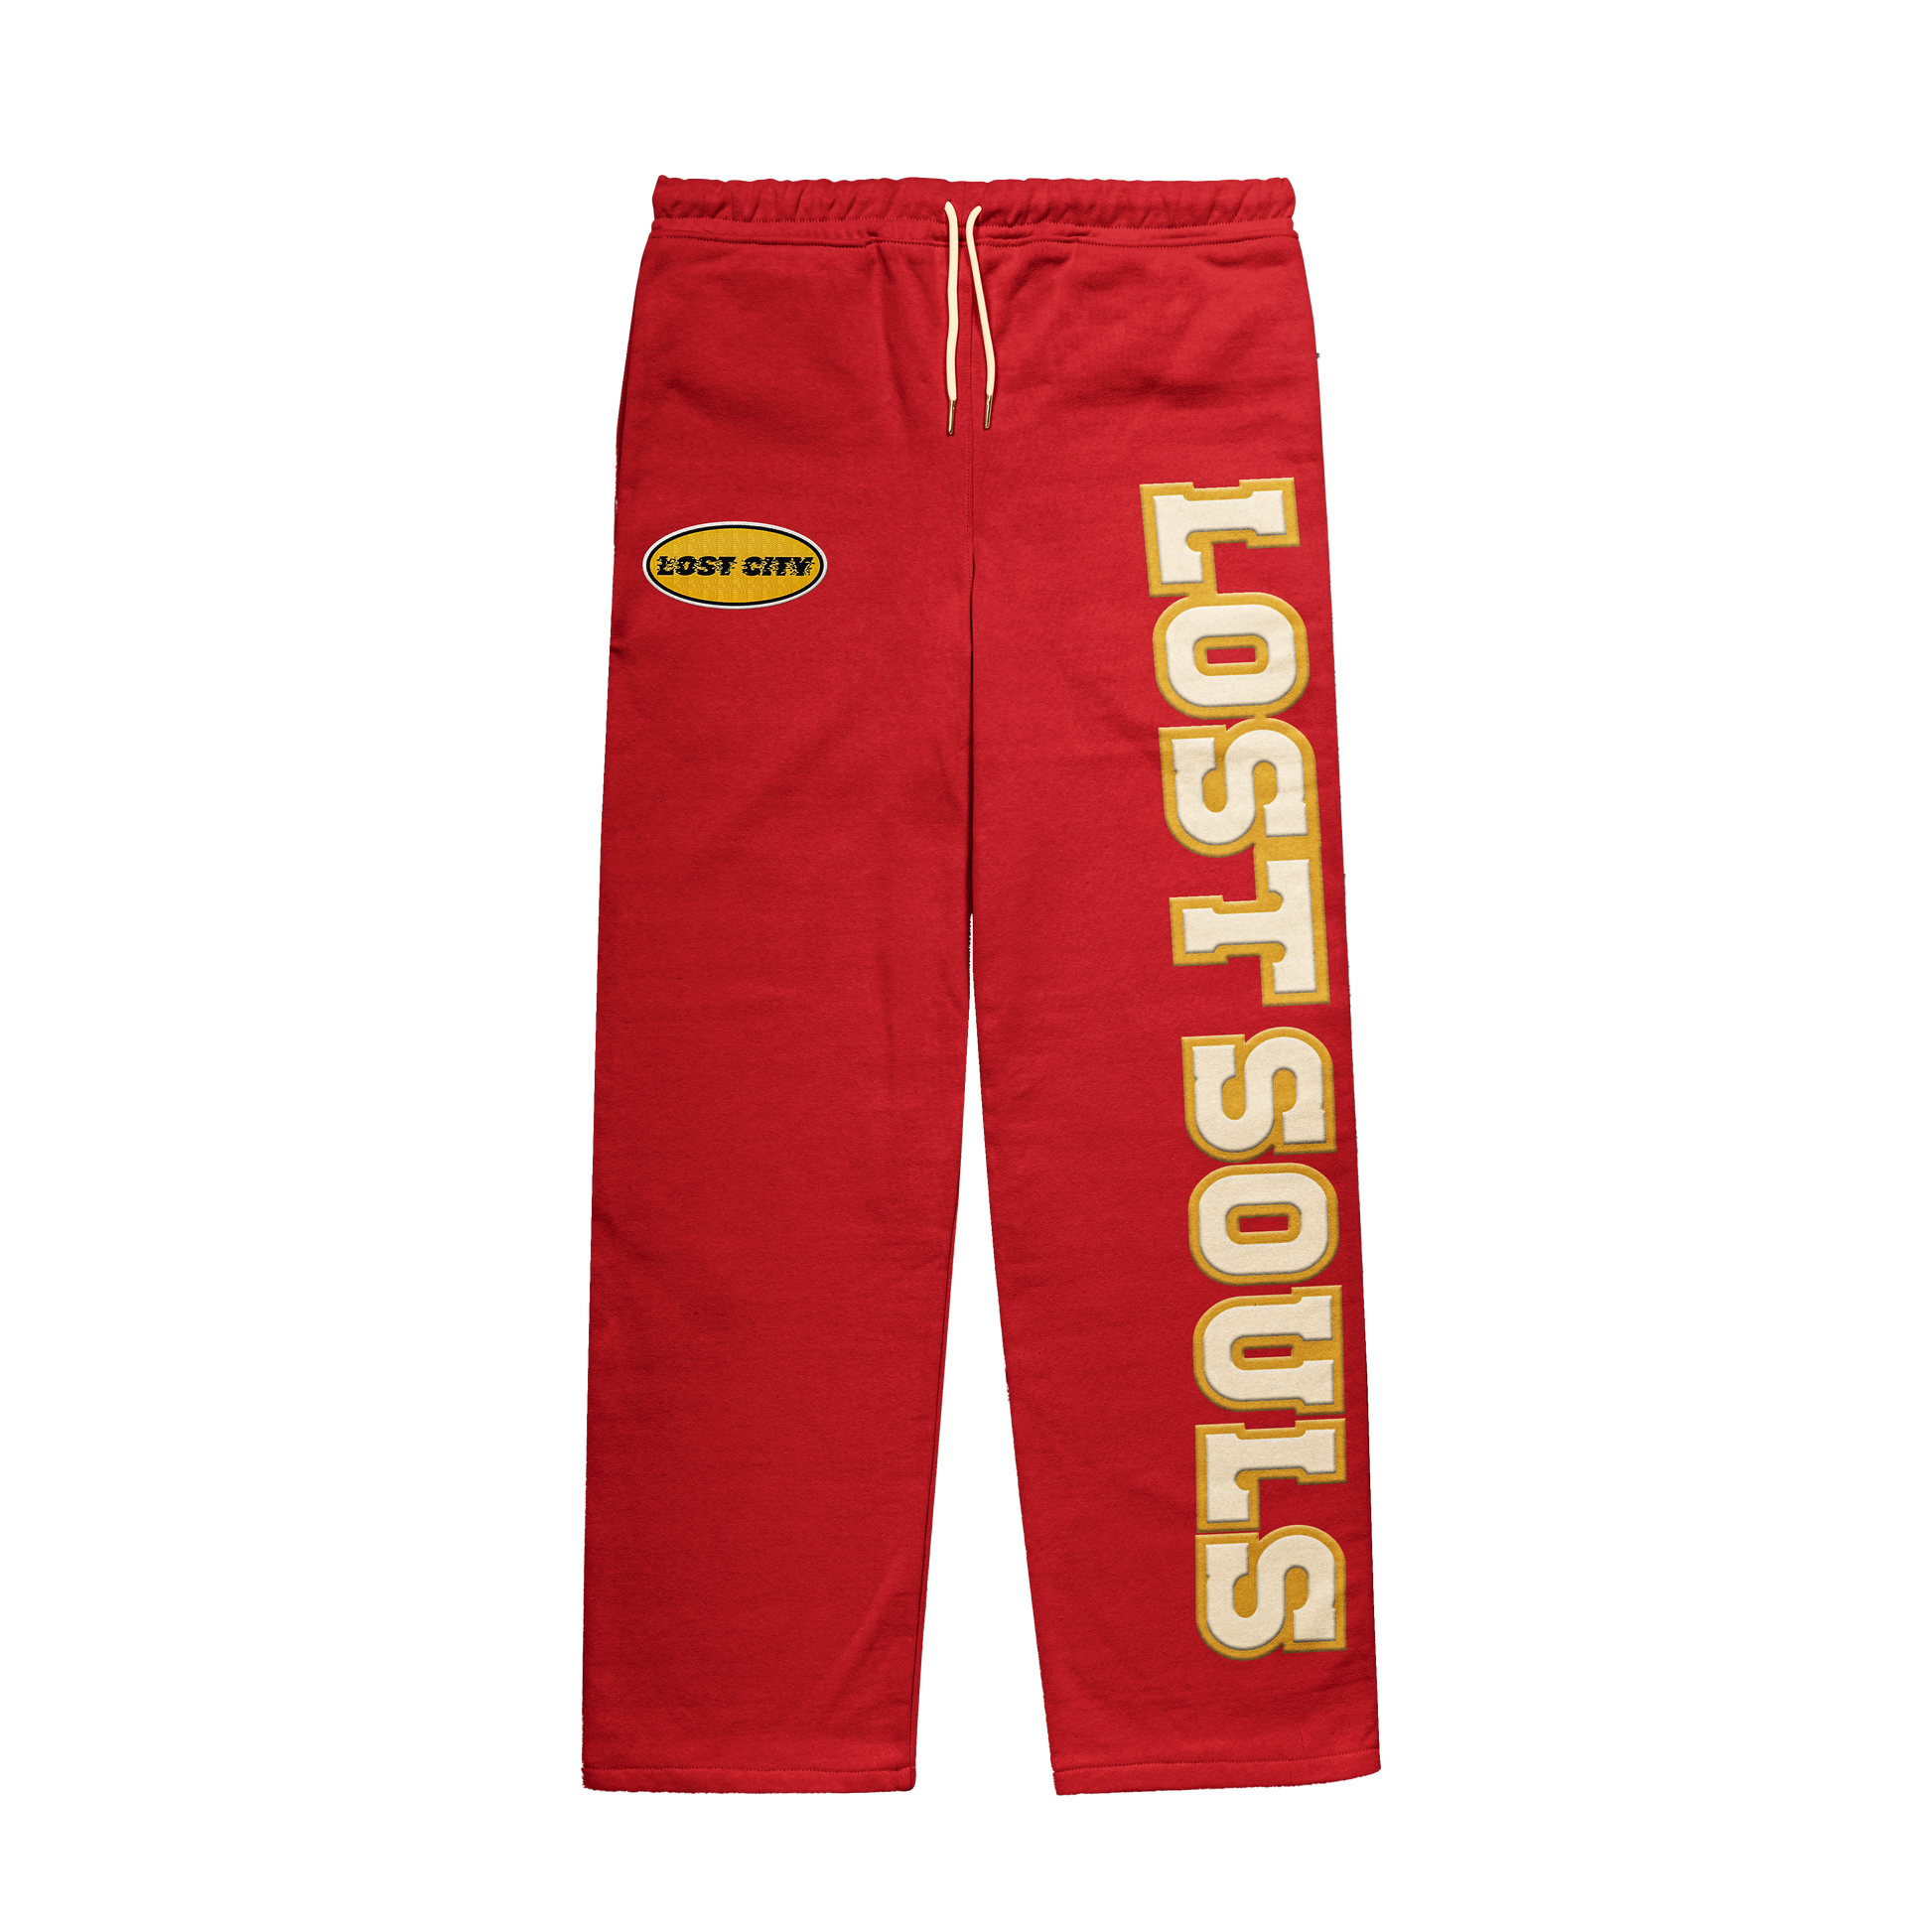 City Terry Sweatpant - Battle Red